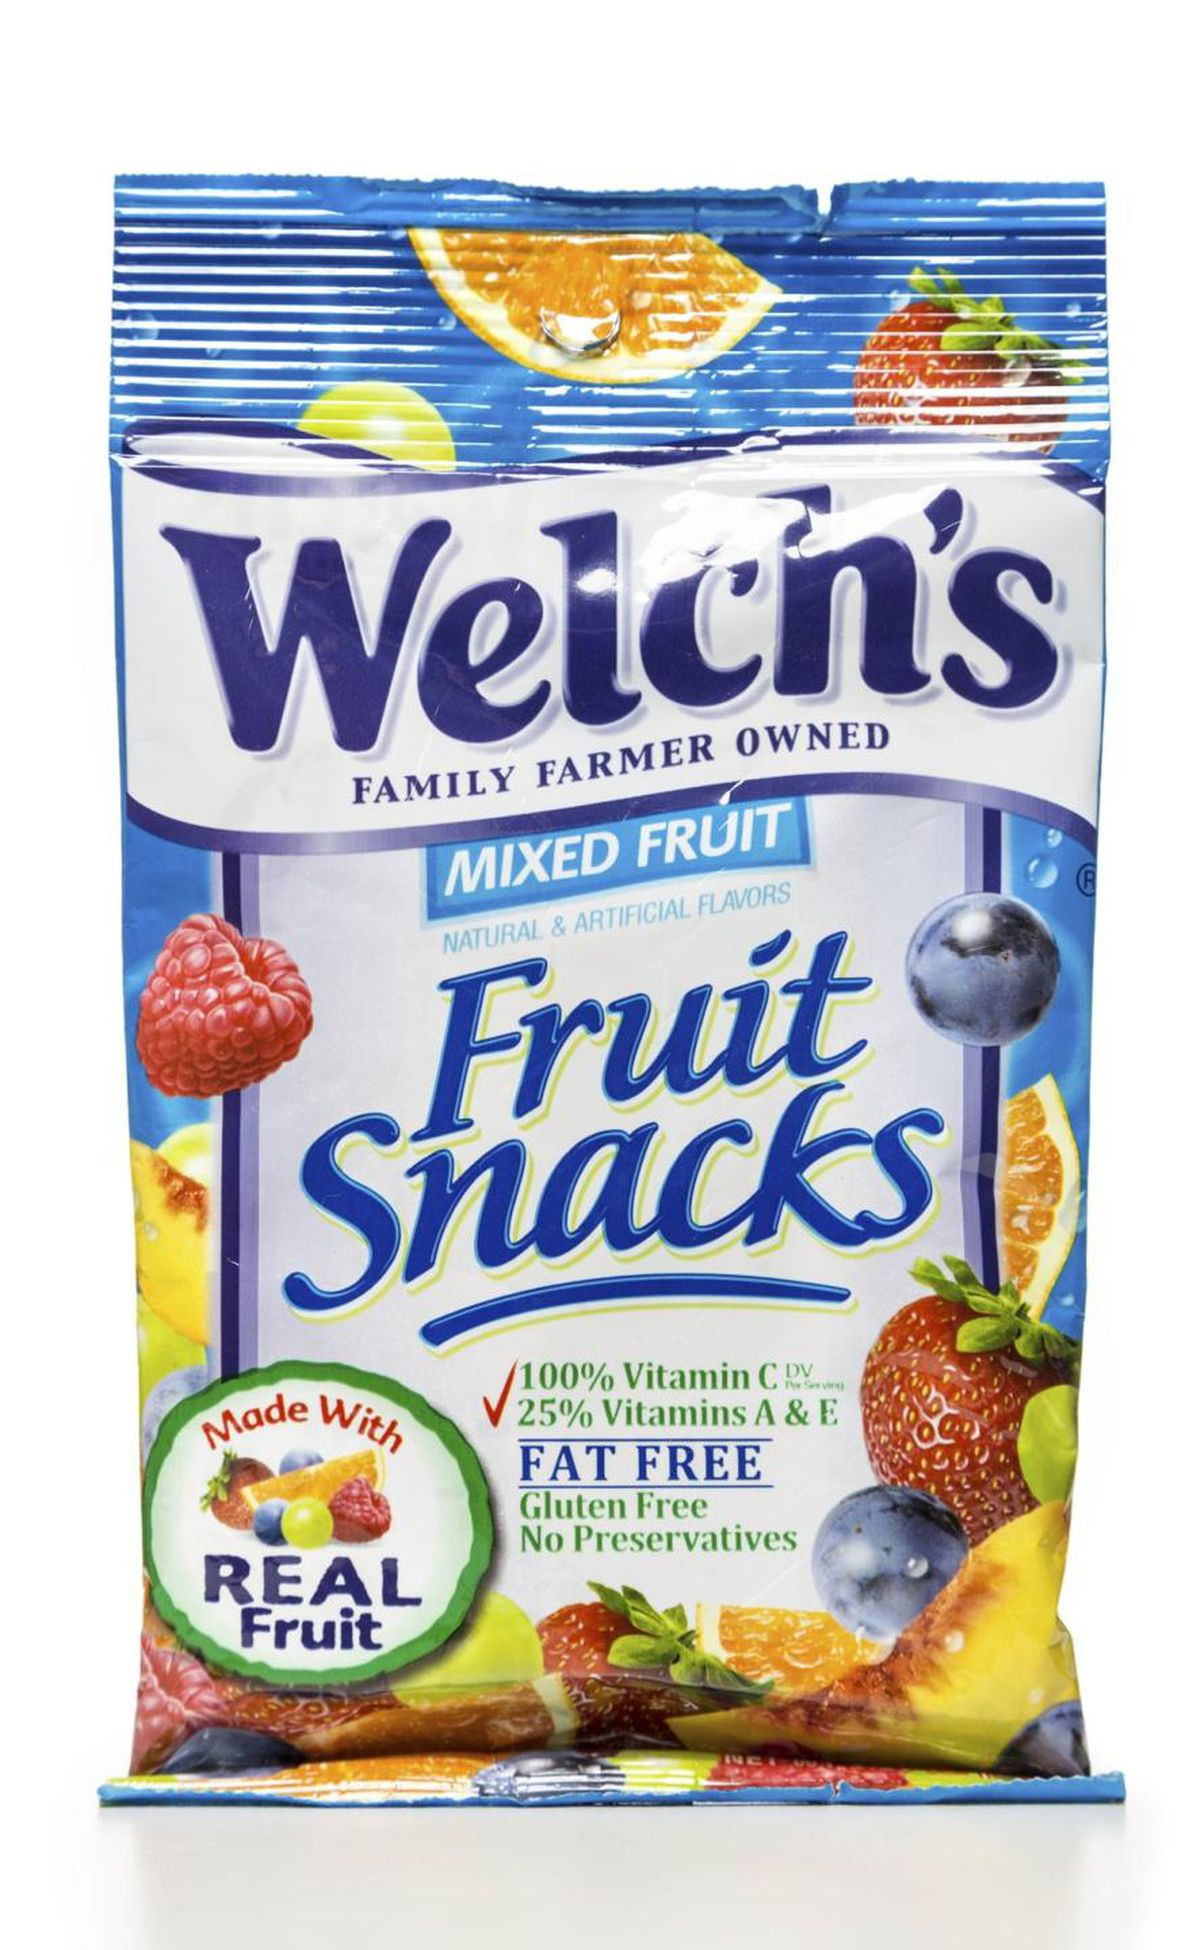 Welch'S Fruit Snacks Healthy
 Welch’s Fruit Snacks are not as healthy as they appear a